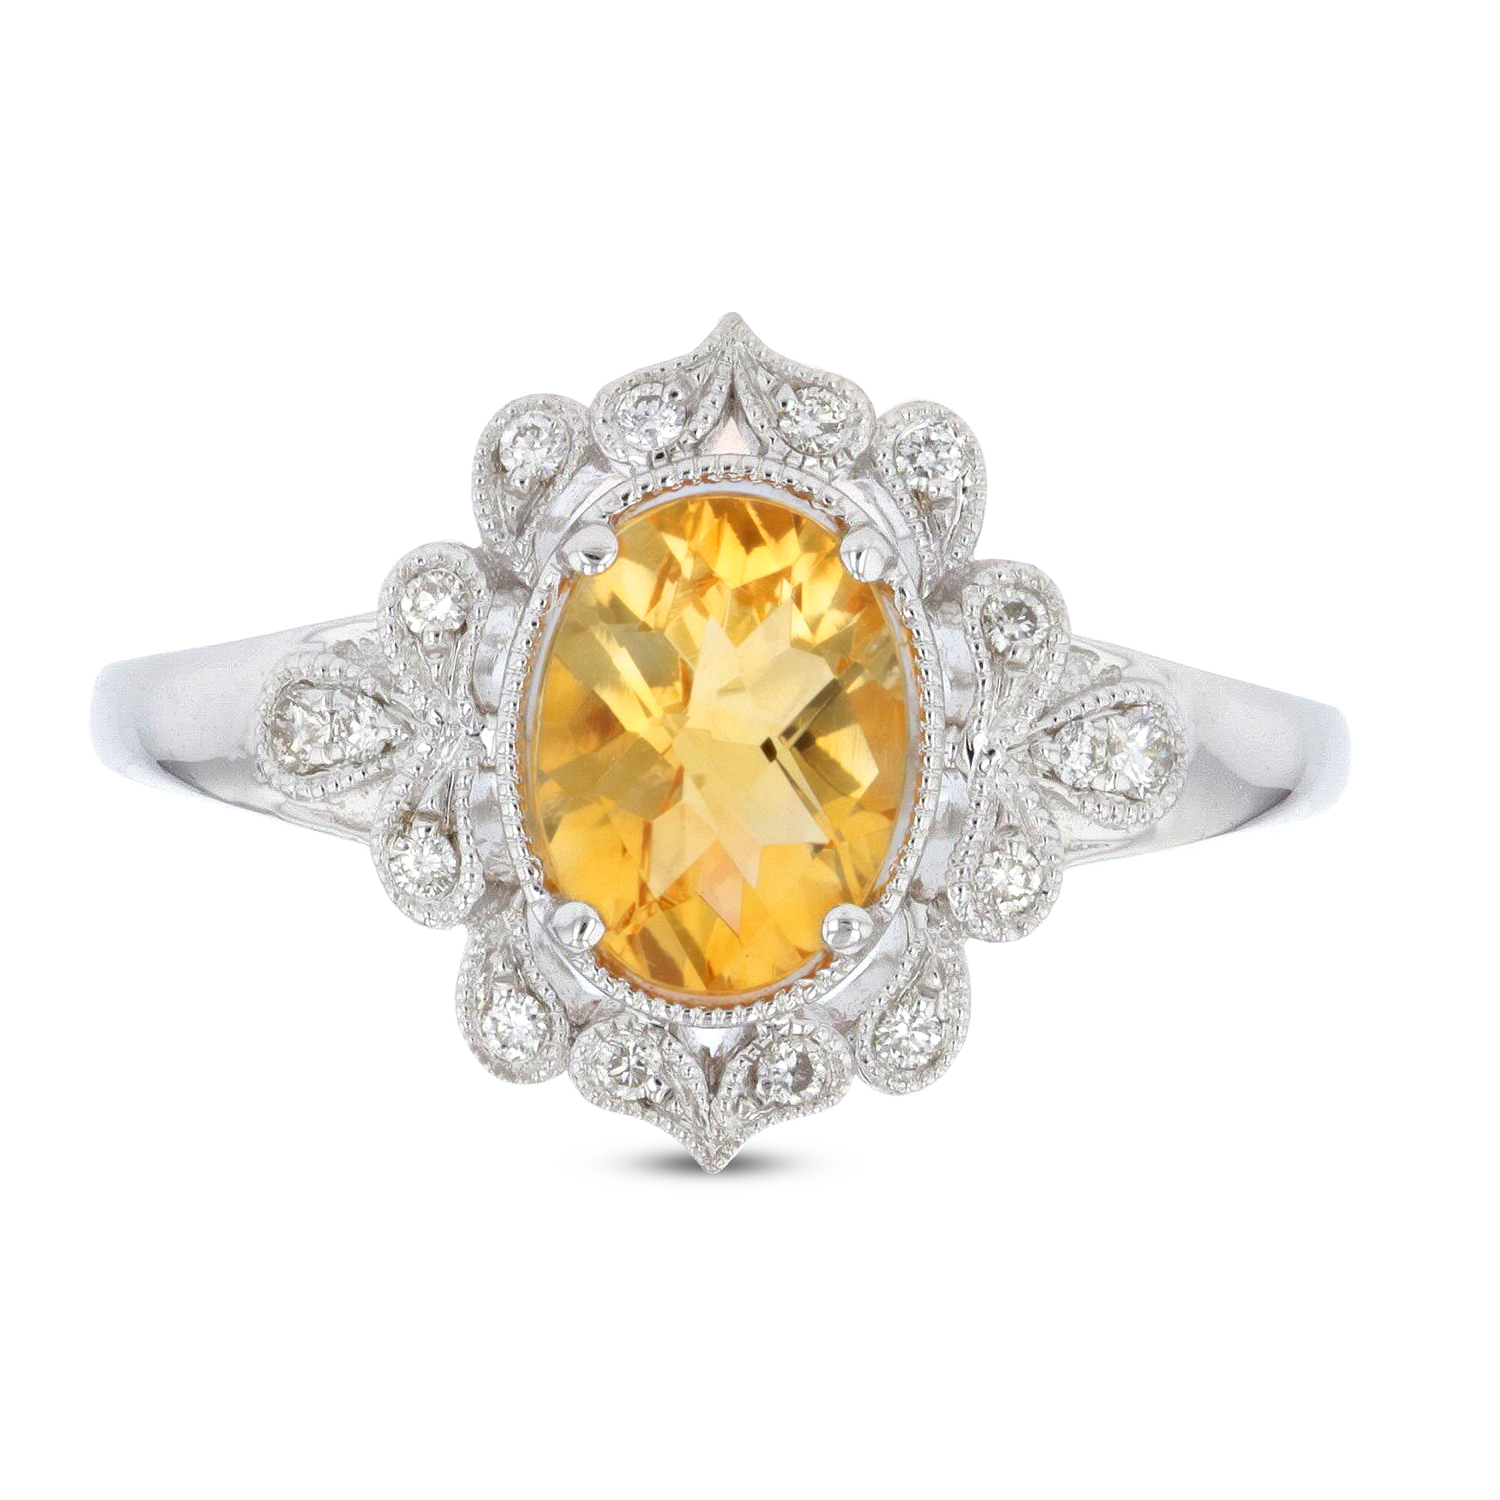 View 1.13ctw Diamond and Citrine Ring in 14k White Gold 